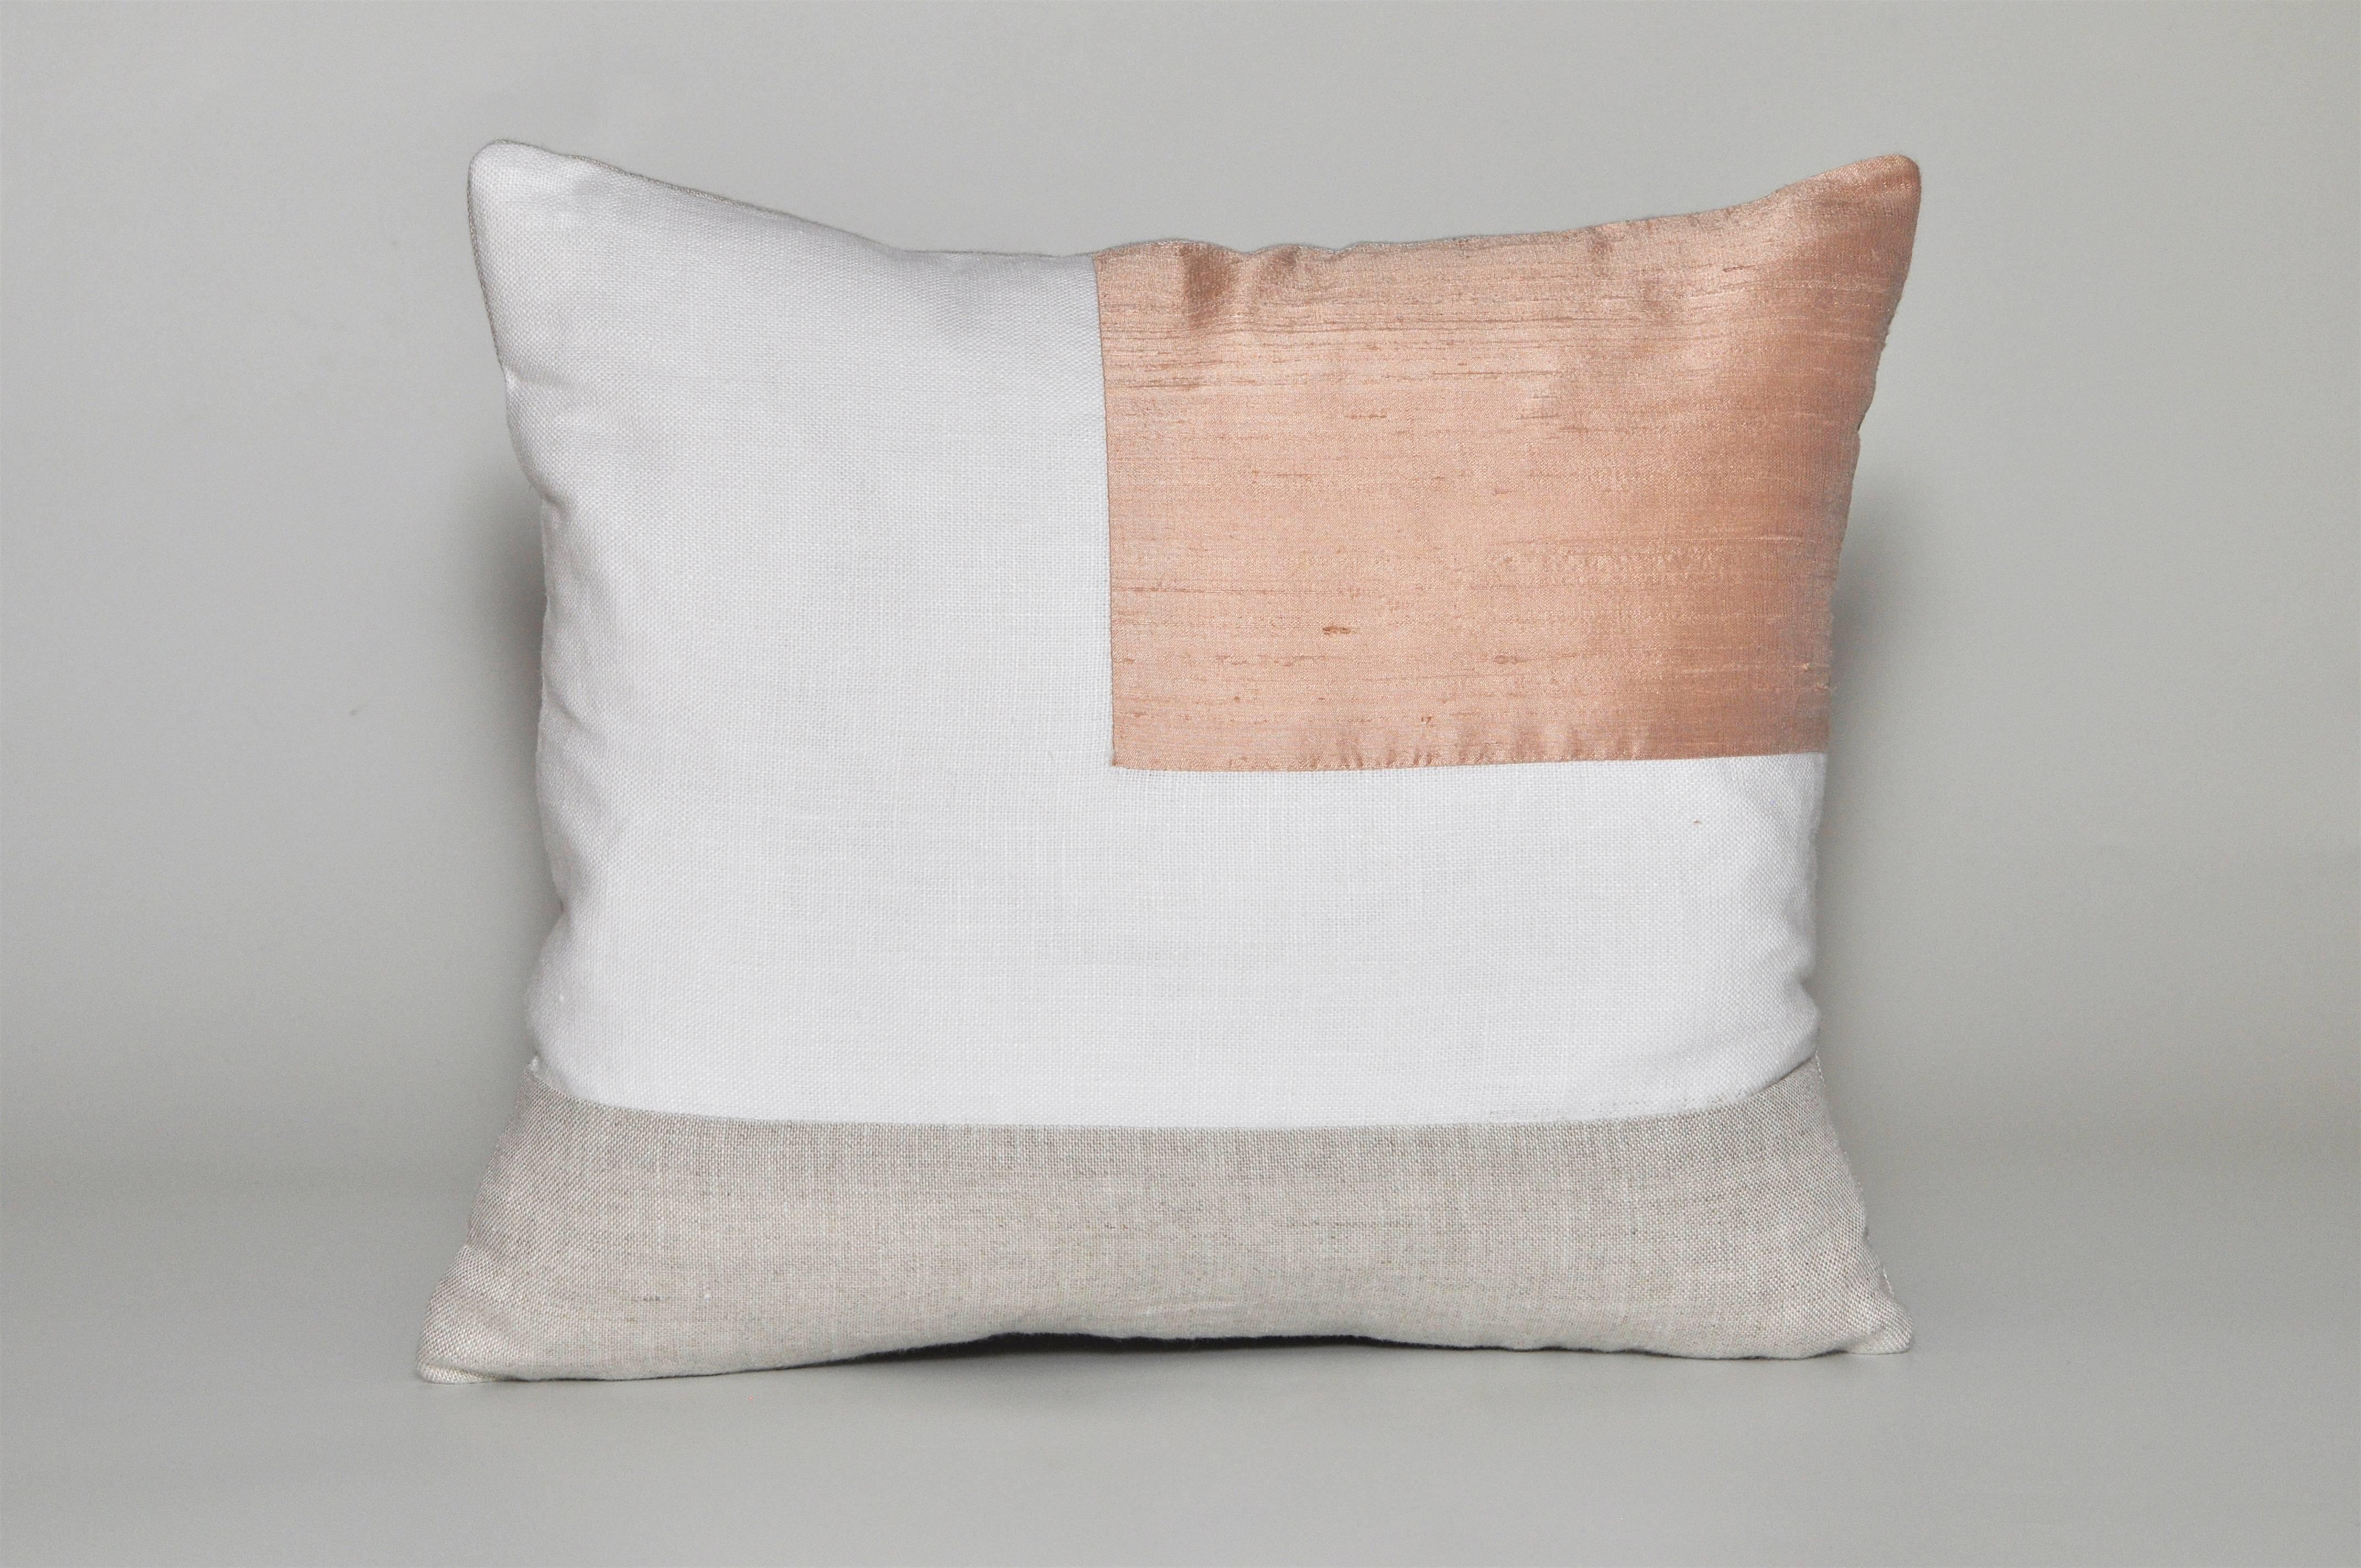 A custom-made contemporary luxury cushion (pillow) constructed with vintage elements by using fragments of precious fabric. Antique 100% pure raw silk, with beautiful visible texture of ‘slubs’ (the nibbly bits) and grain from being handwoven giving